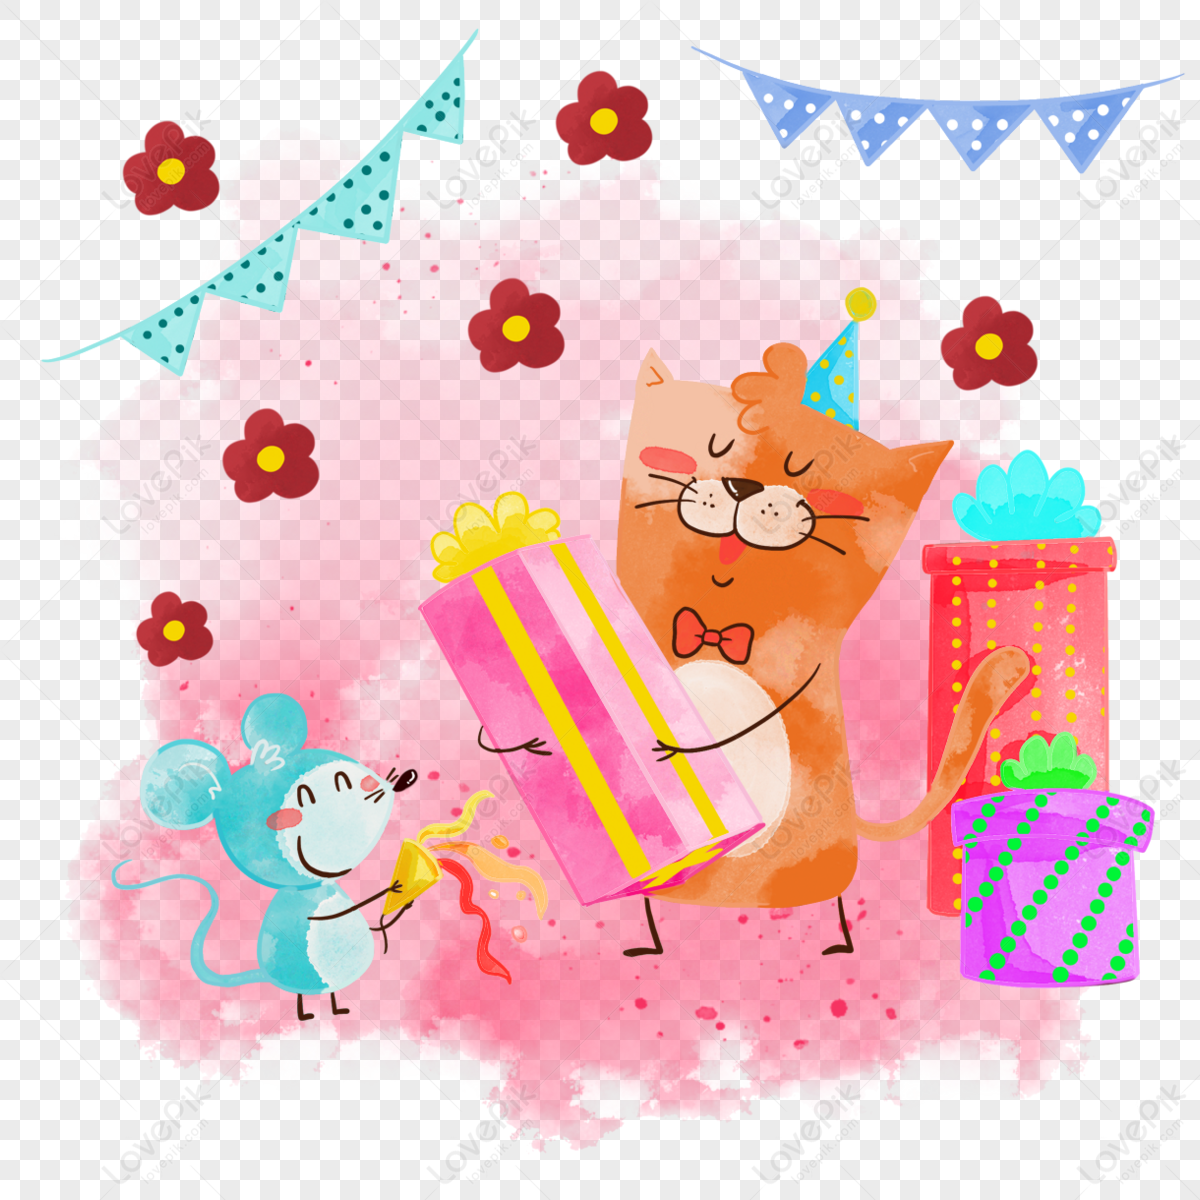 Watercolor cartoon cats and mouse animals pass birthday,celebrate,blooming png transparent image